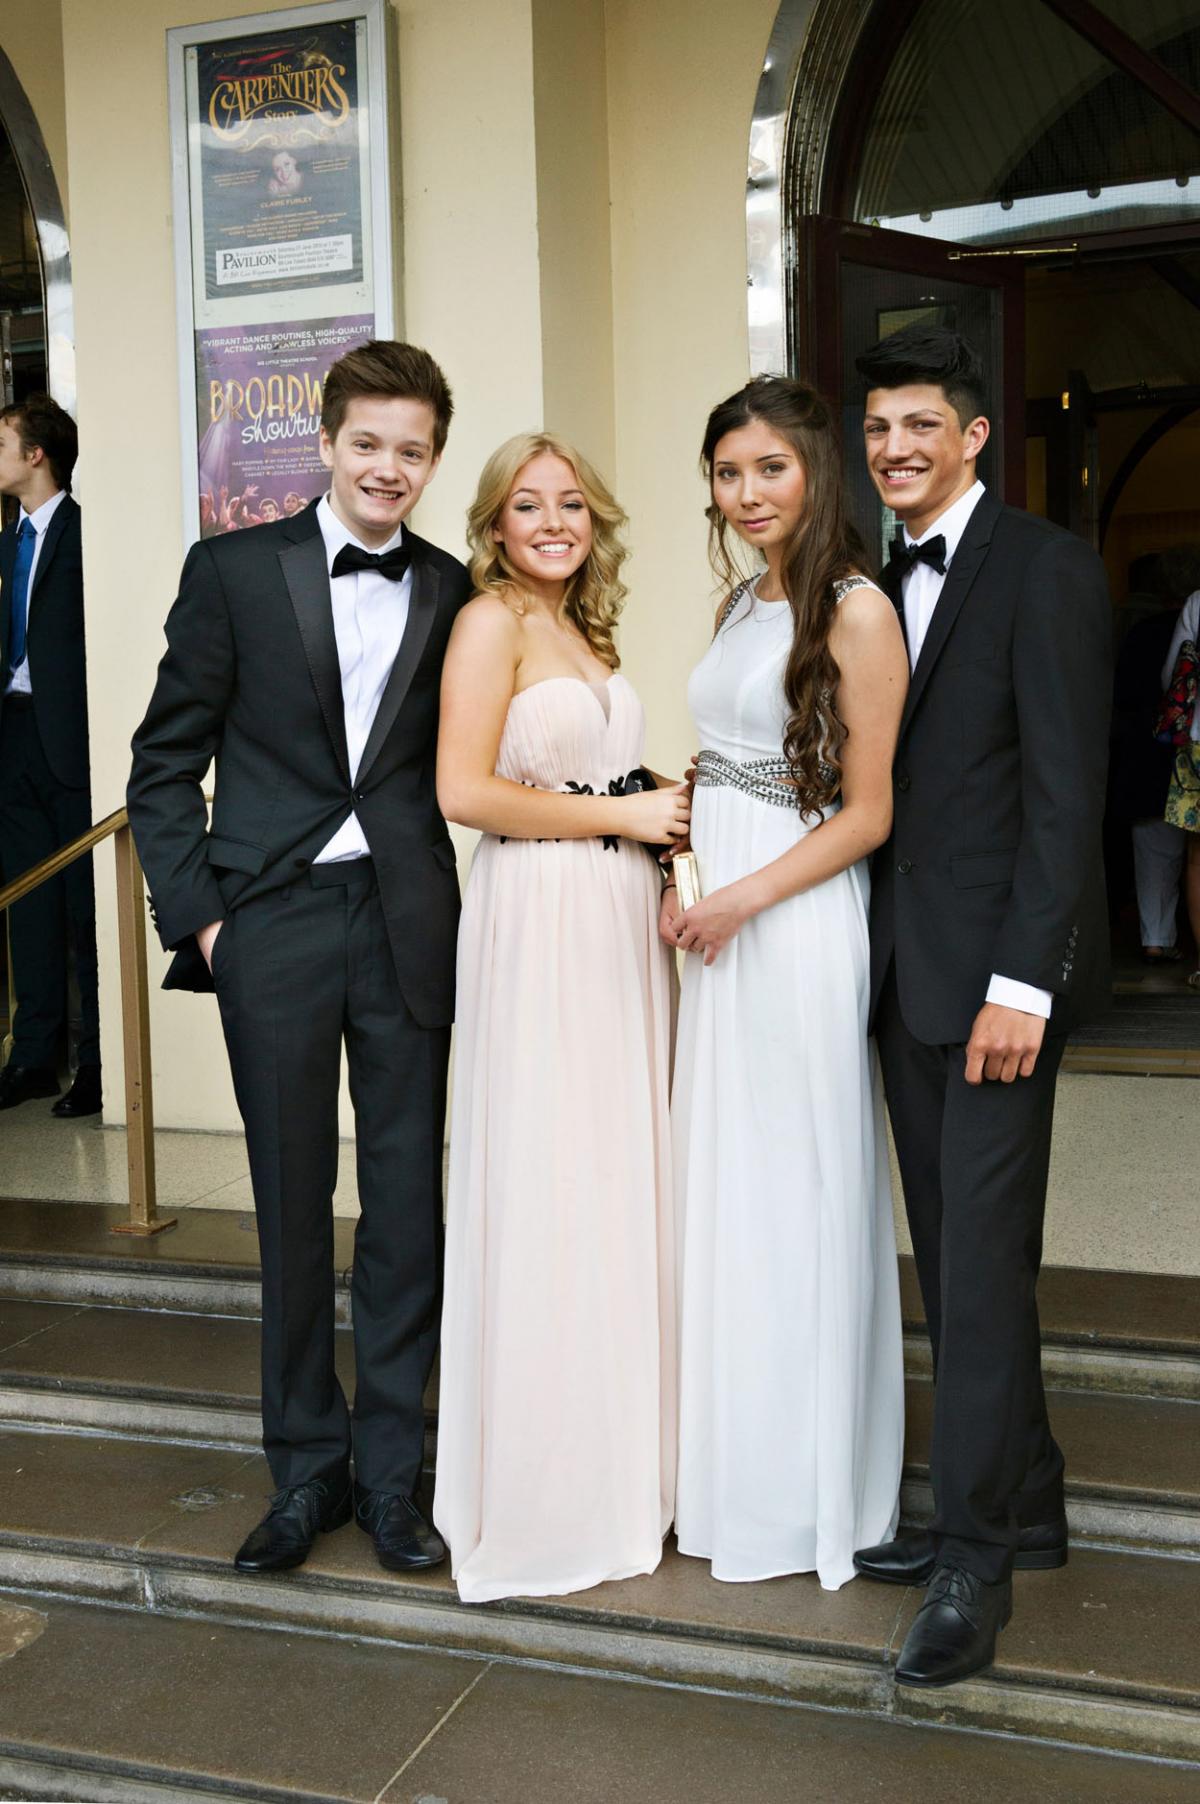 Bournemouth School for Girls and Boys Year 11 at Bournemouth Pavilion on 27th June 2015. Pictures by Samantha Cook. Get a 25% discount on photo prints - just add echosave25 at the checkout